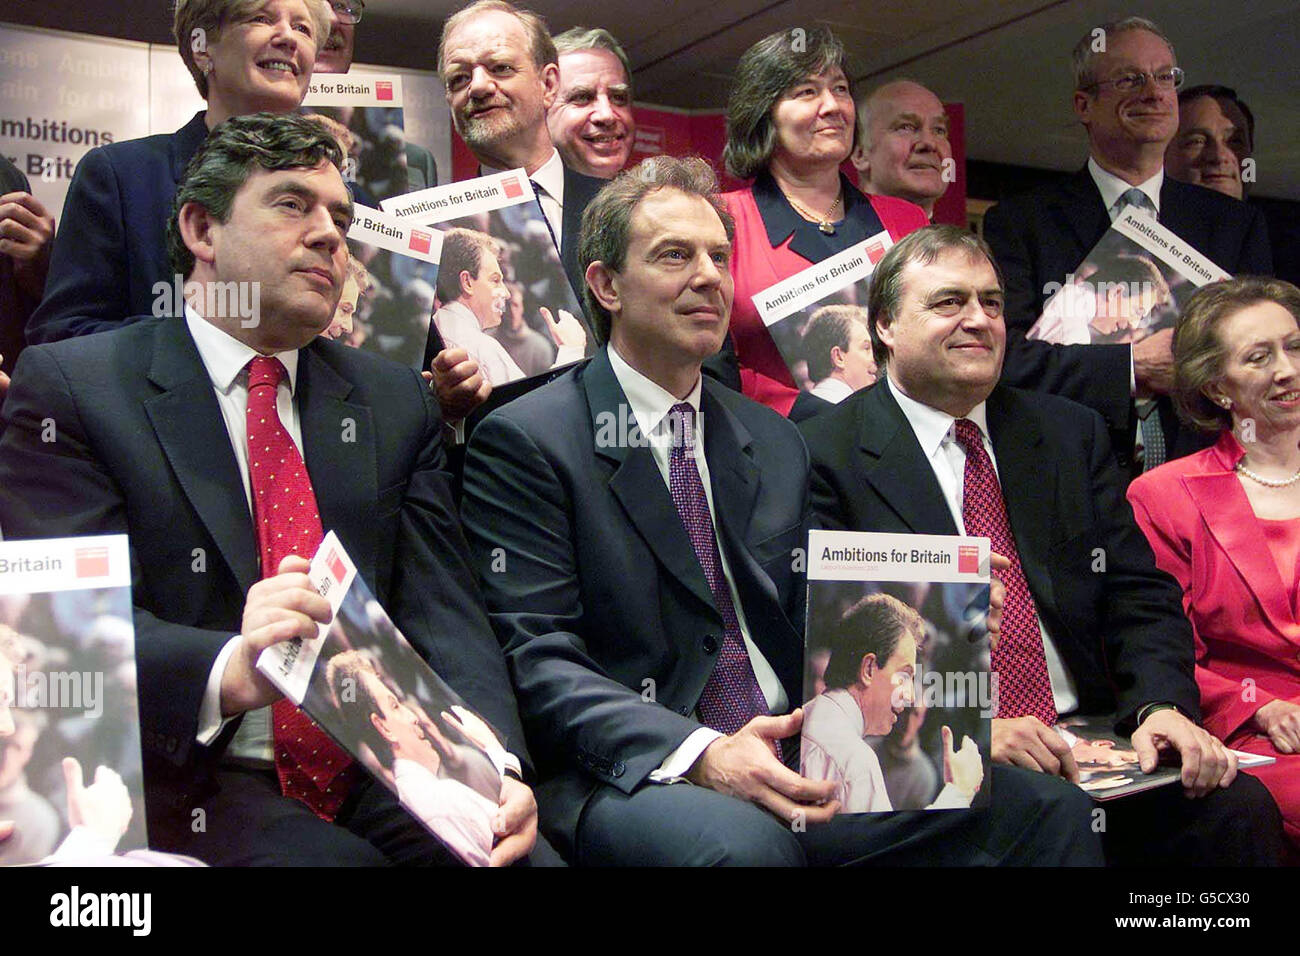 Britain's Prime Minister Tony Blair (centre) with rest of the Cabinet at the launch of the Labour party's manifesto in Birmingham. Under the heading Ambitions for Britain - which is the title of the manifesto - * Mr Blair said Labour's intention was to sustain economic stability and build deeper prosperity that reaches every region of the country. Stock Photo